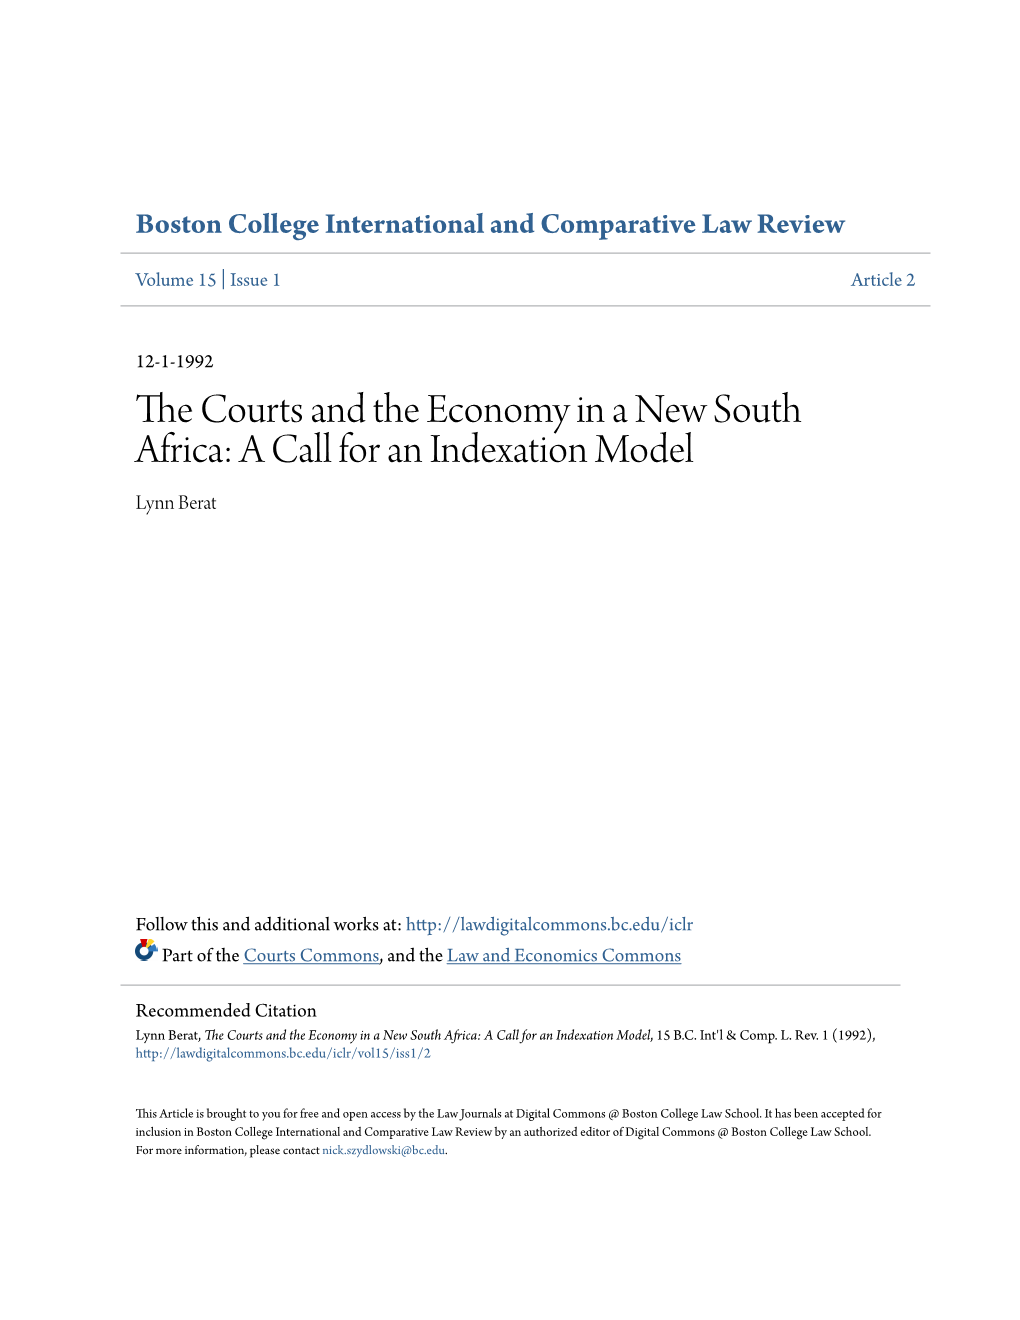 The Courts and the Economy in a New South Africa: a Call for an Indexation Model, 15 B.C